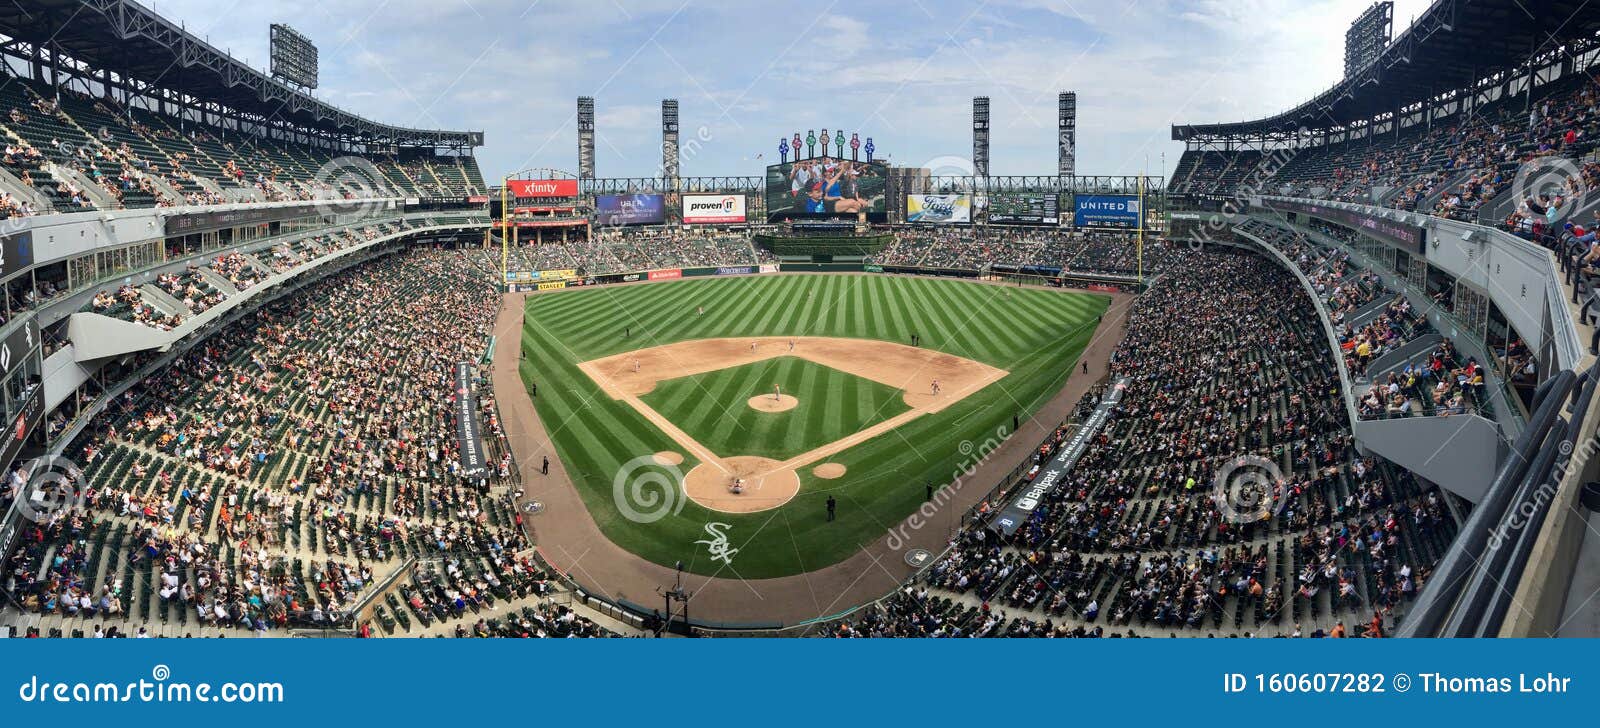 Panoramic View of the Chicago White Sox Ballpark Editorial Photography -  Image of chicago, play: 160607282